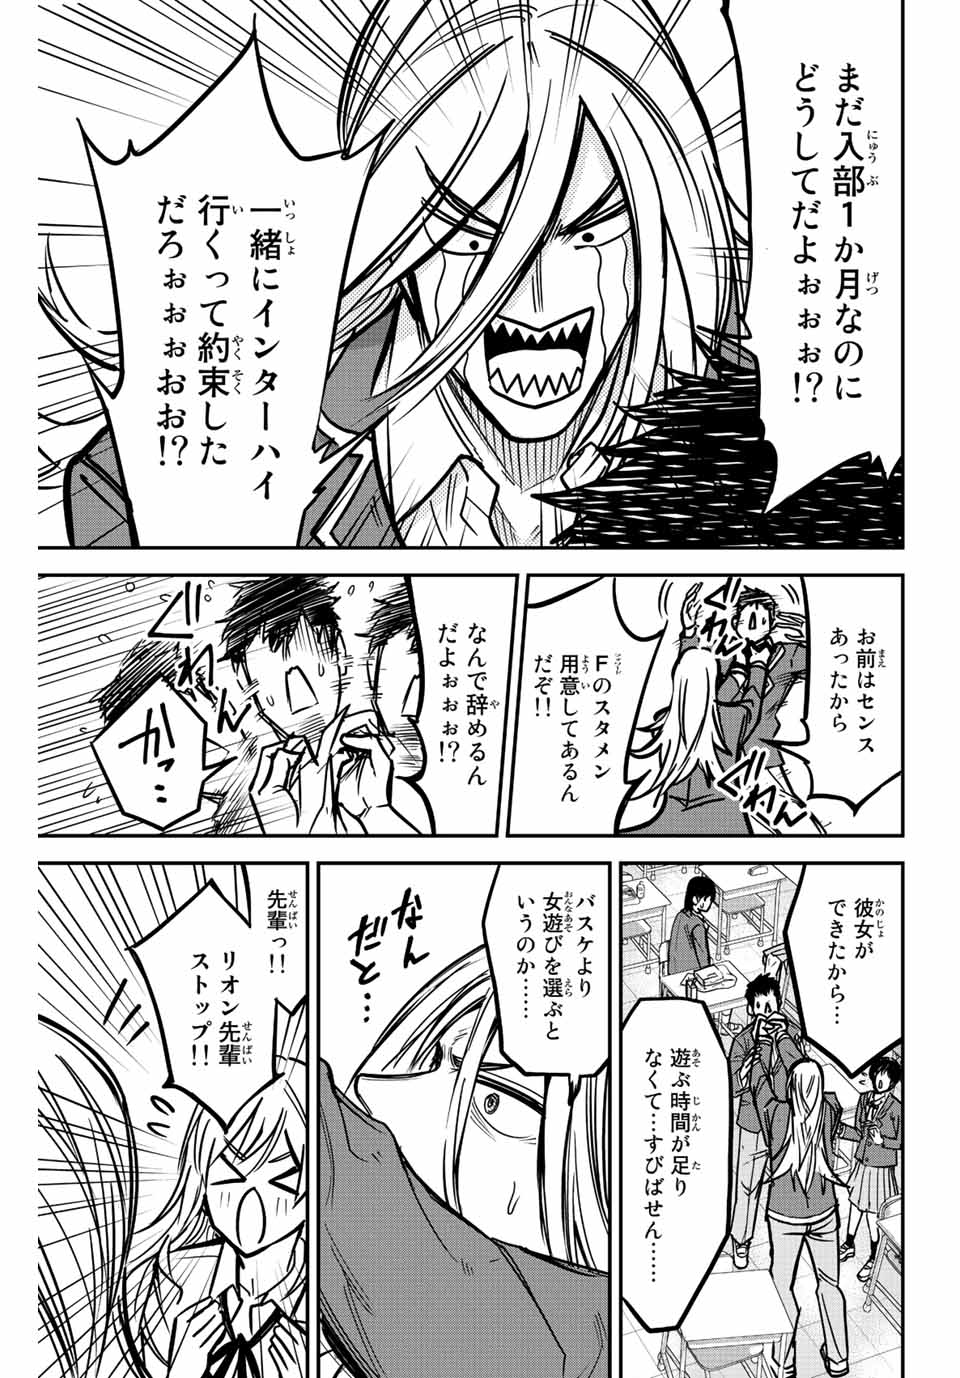 B＆ALIVE 第2.1話 - Page 3